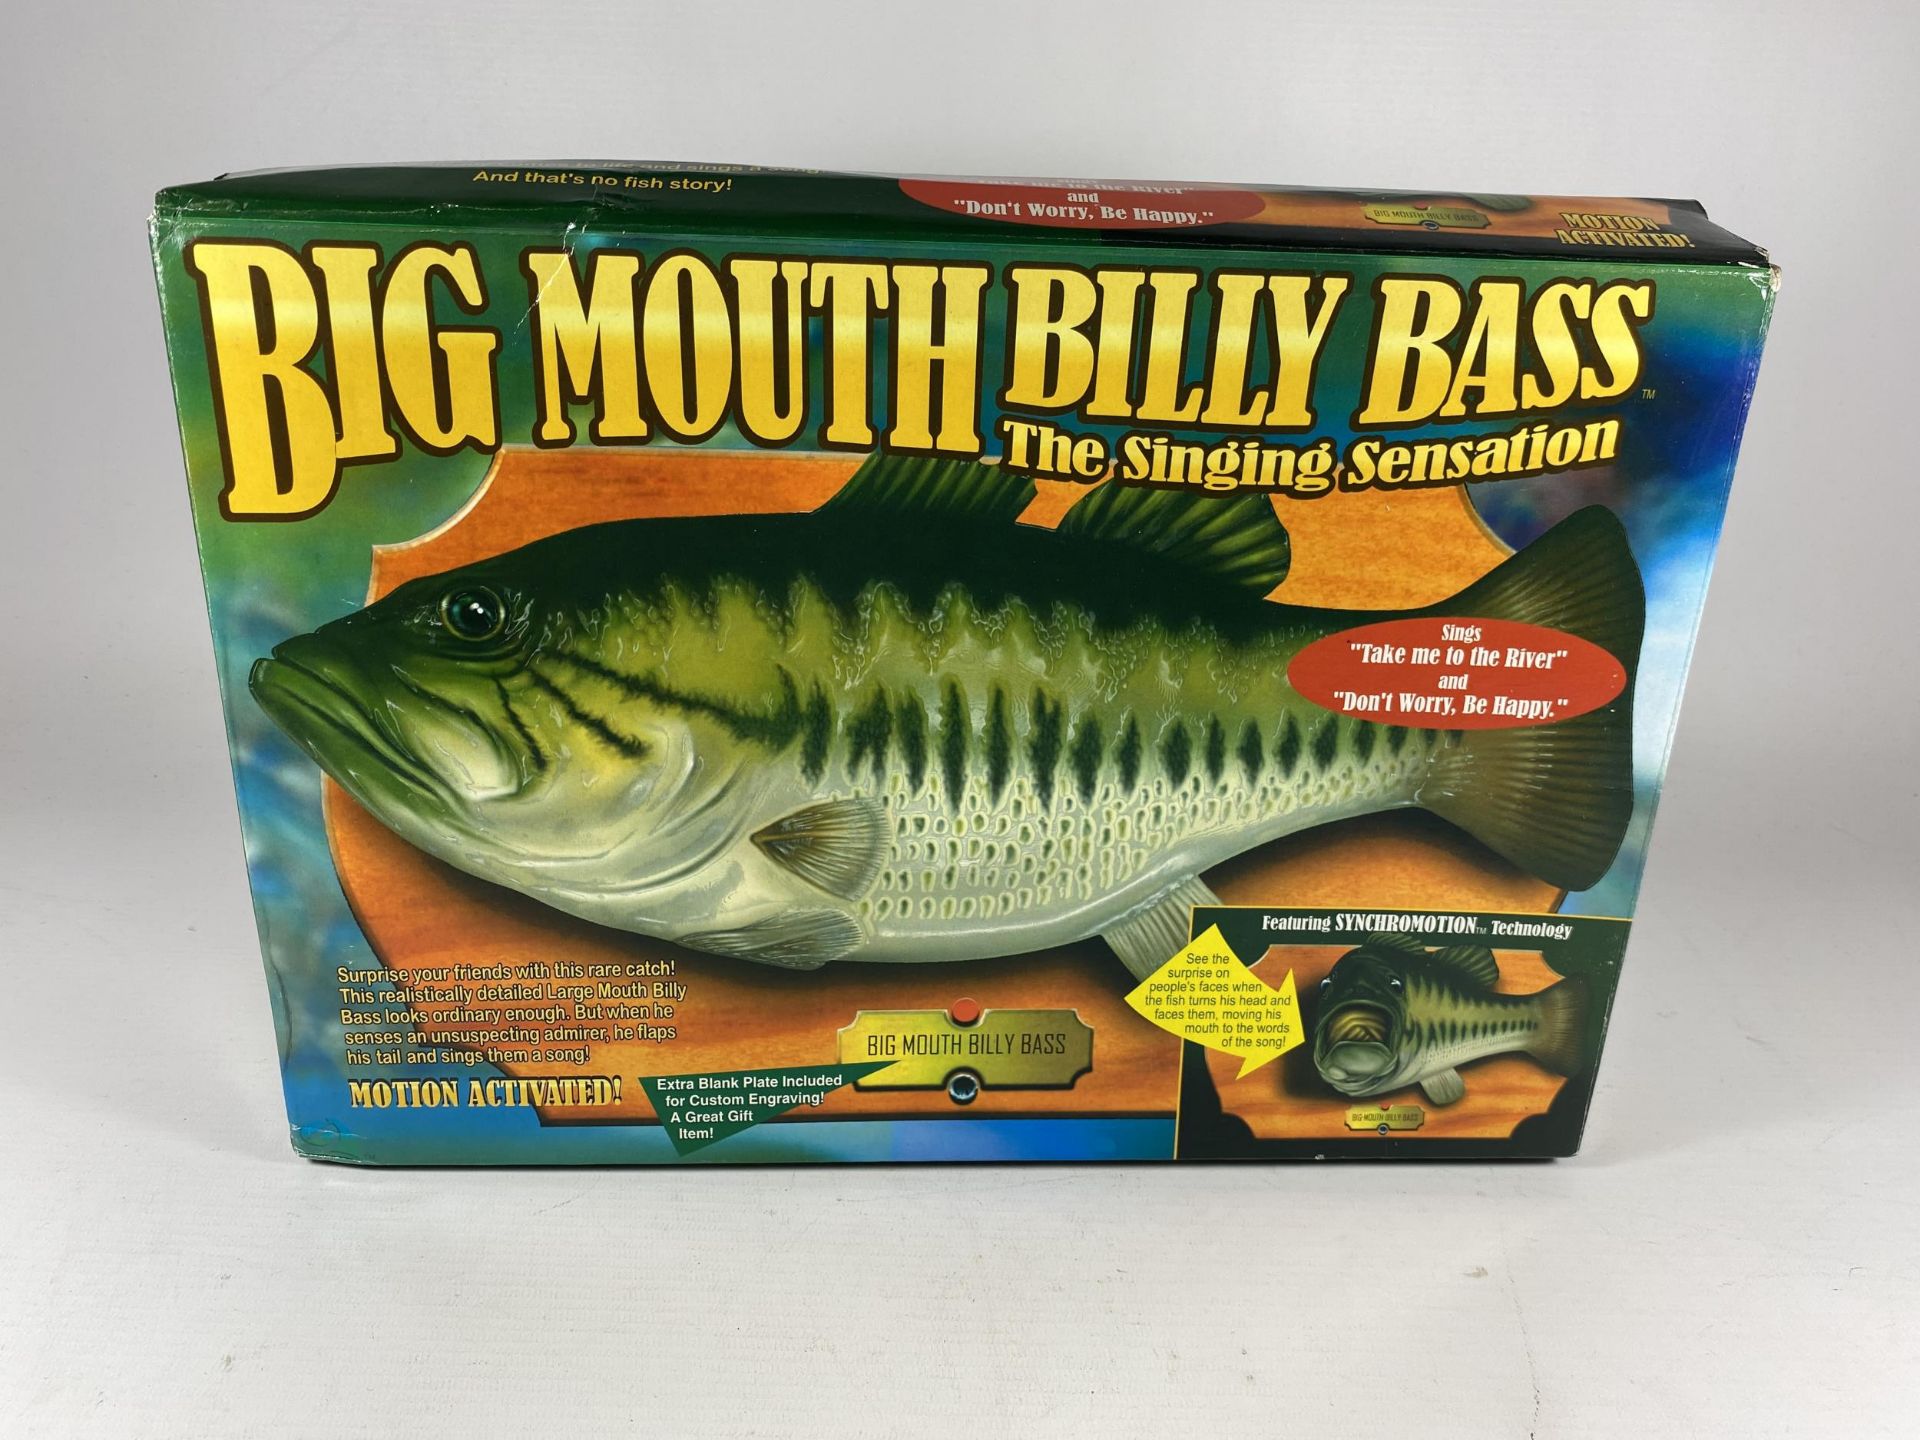 A BOXED RETRO BIG MOUTH BILLY BASS THE SINGING SENSATION